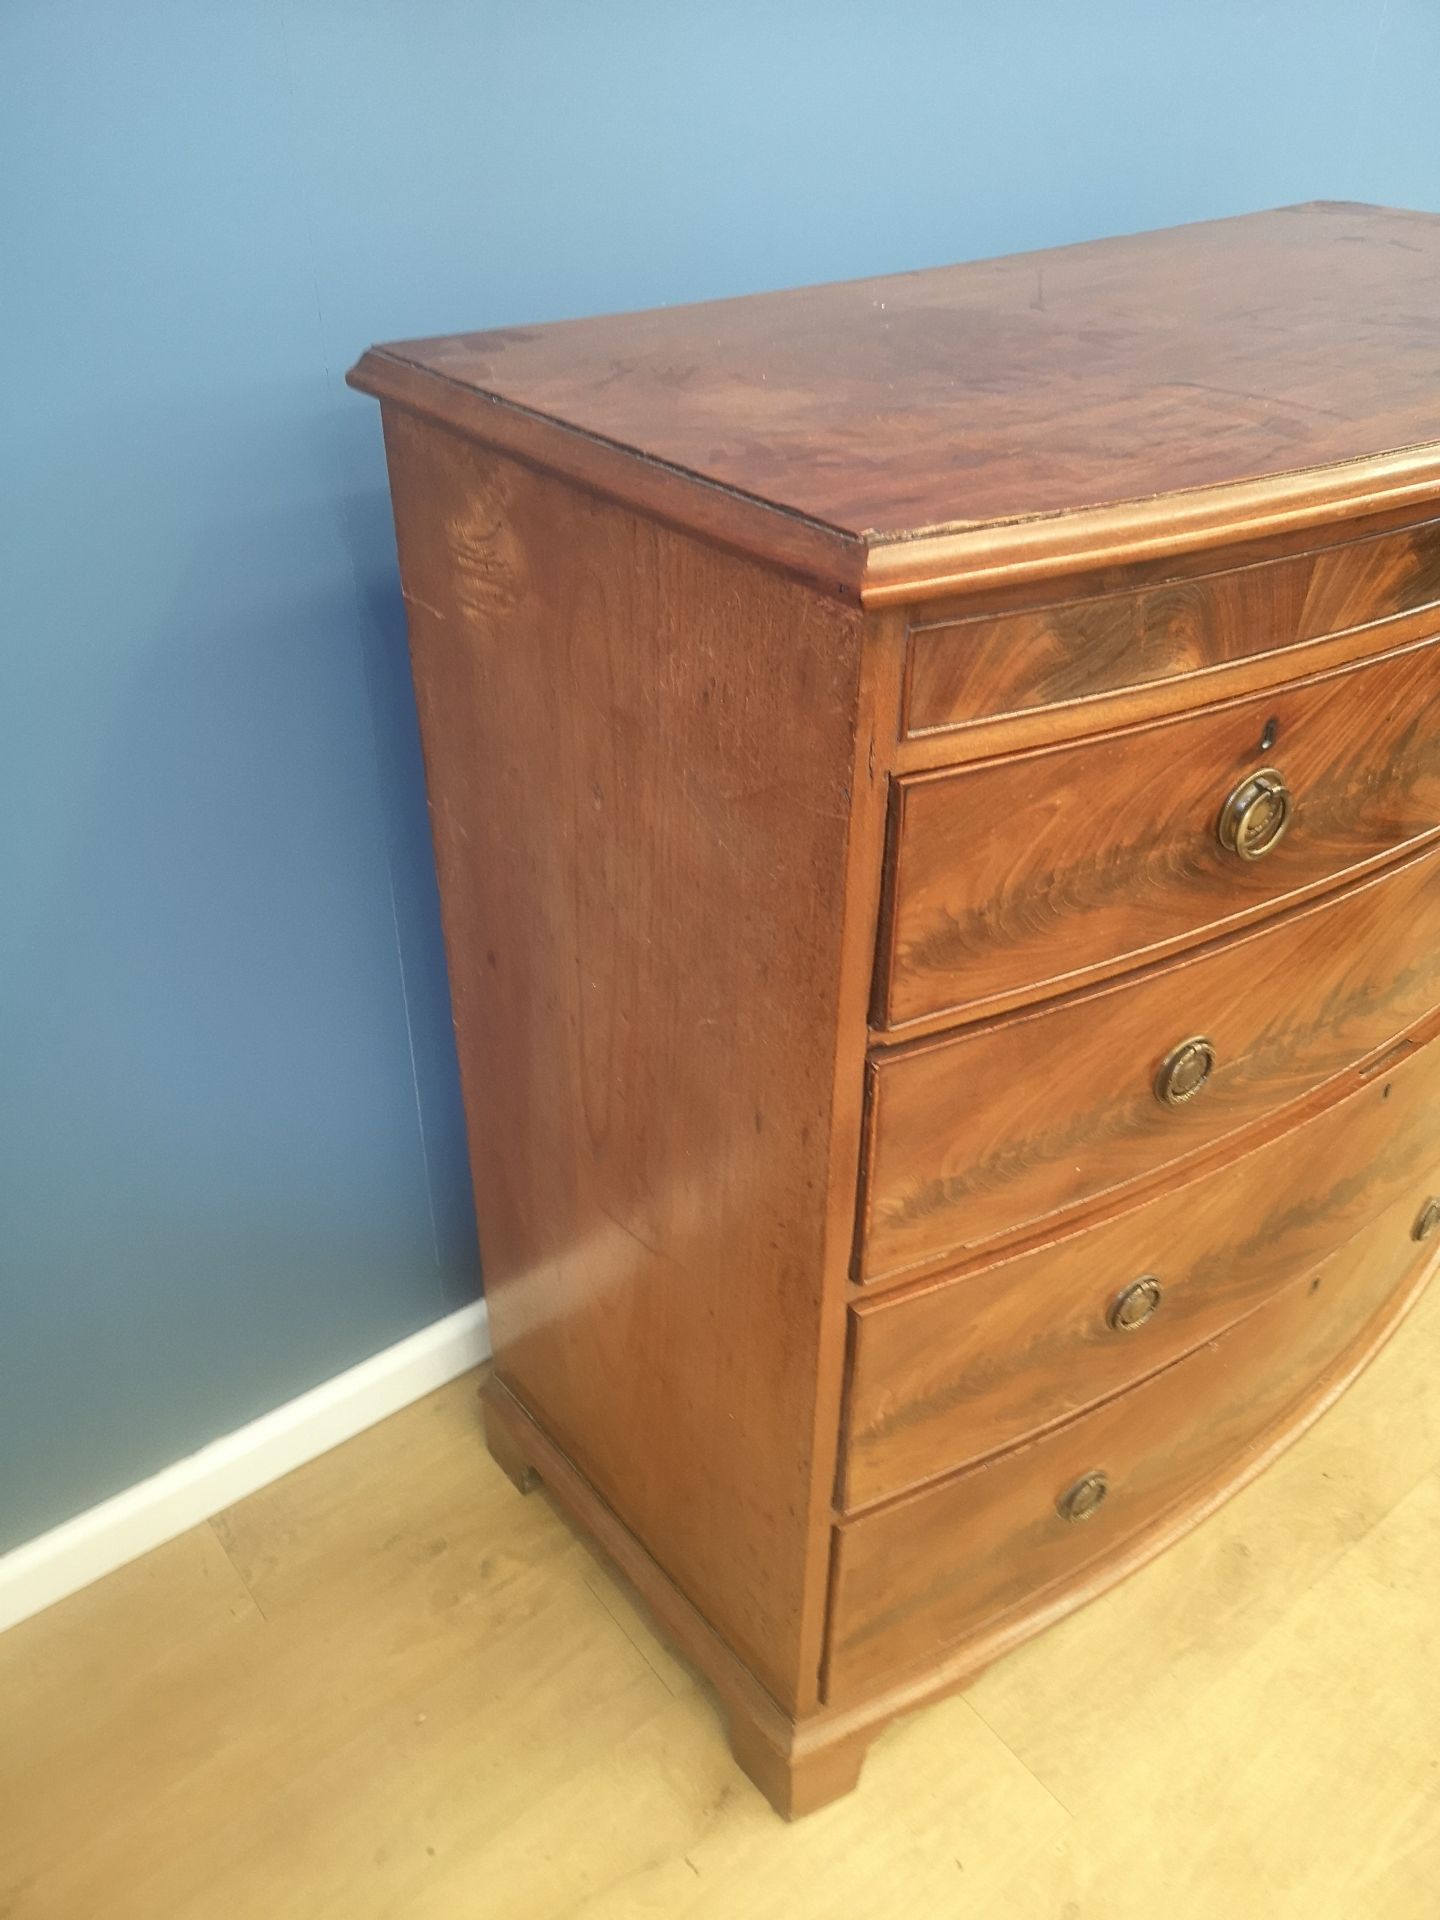 Mahogany bow fronted chest of drawers - Image 5 of 6